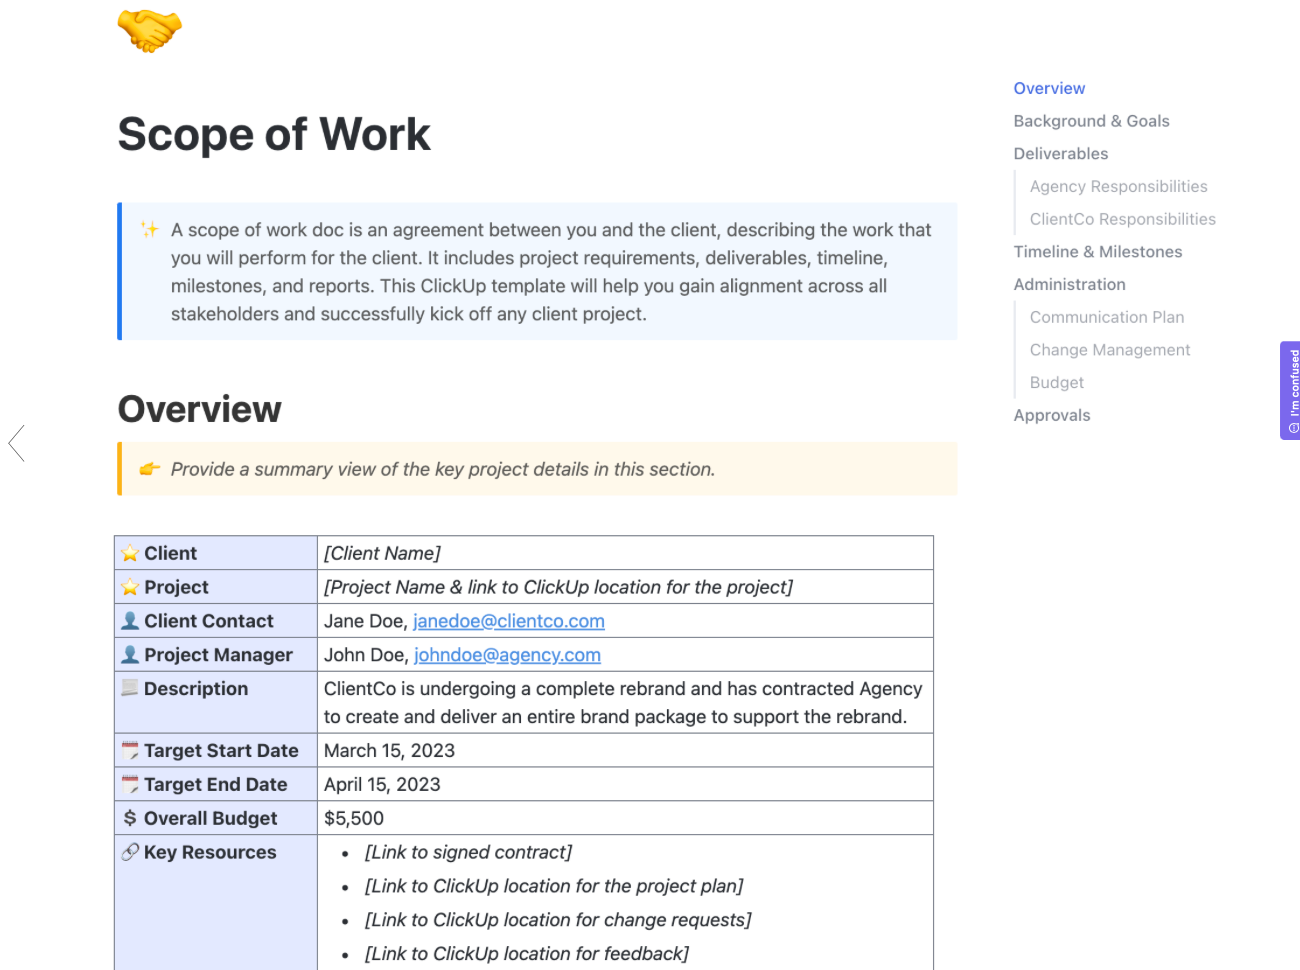 This template offers a more traditional approach to scope of work planning. 